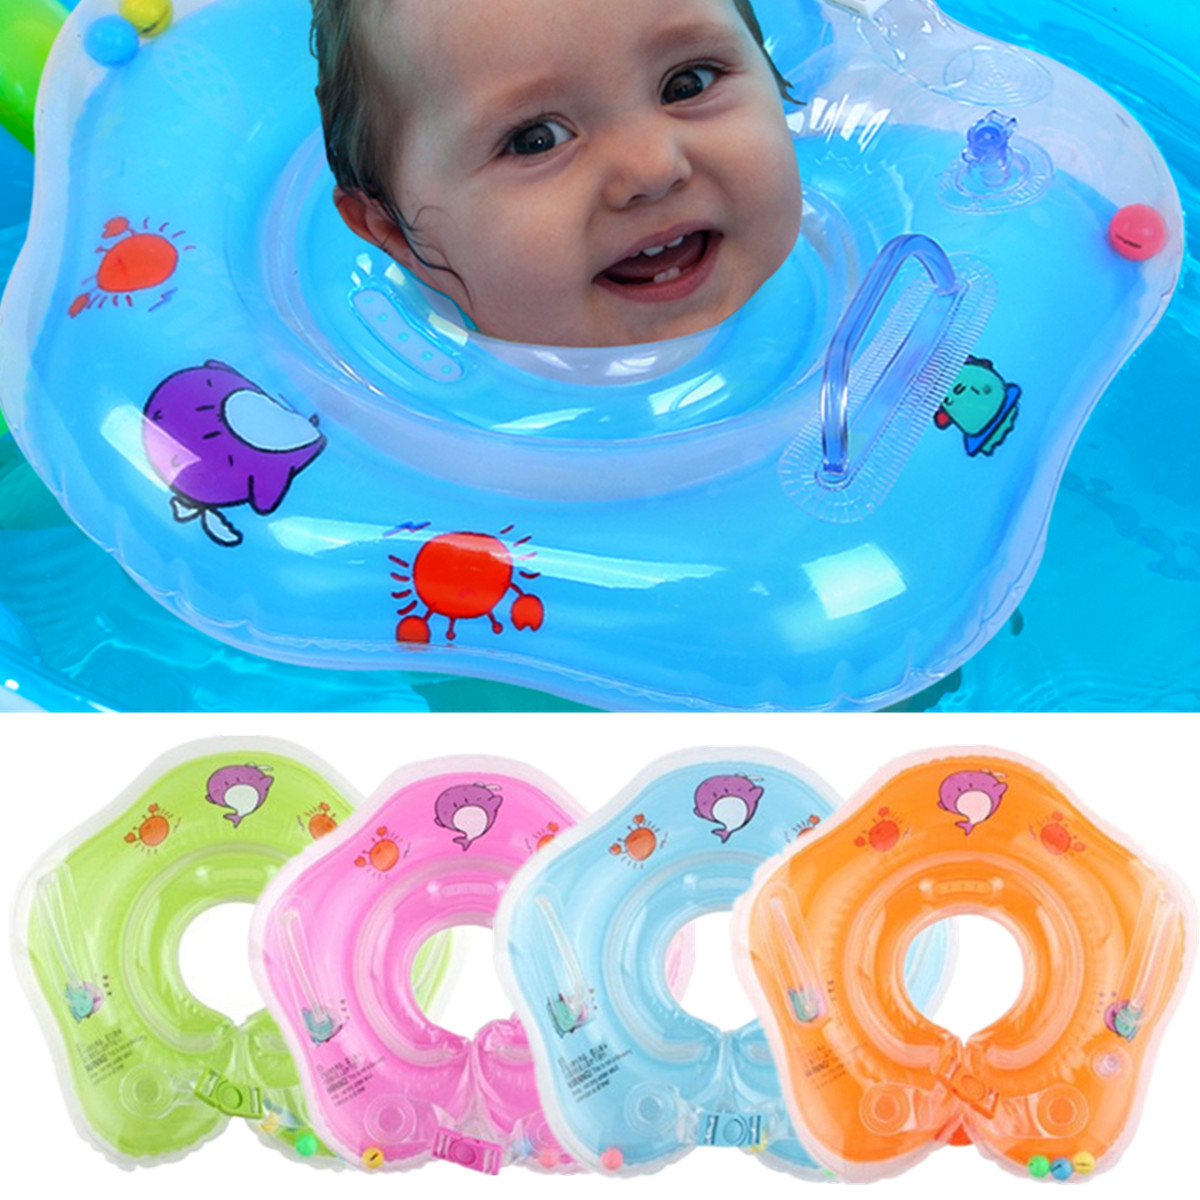 Baby-Infant-Swimming-Pool-Bath-Neck-Floating-Inflatable-Ring-Built-in-Belt-1169362-2